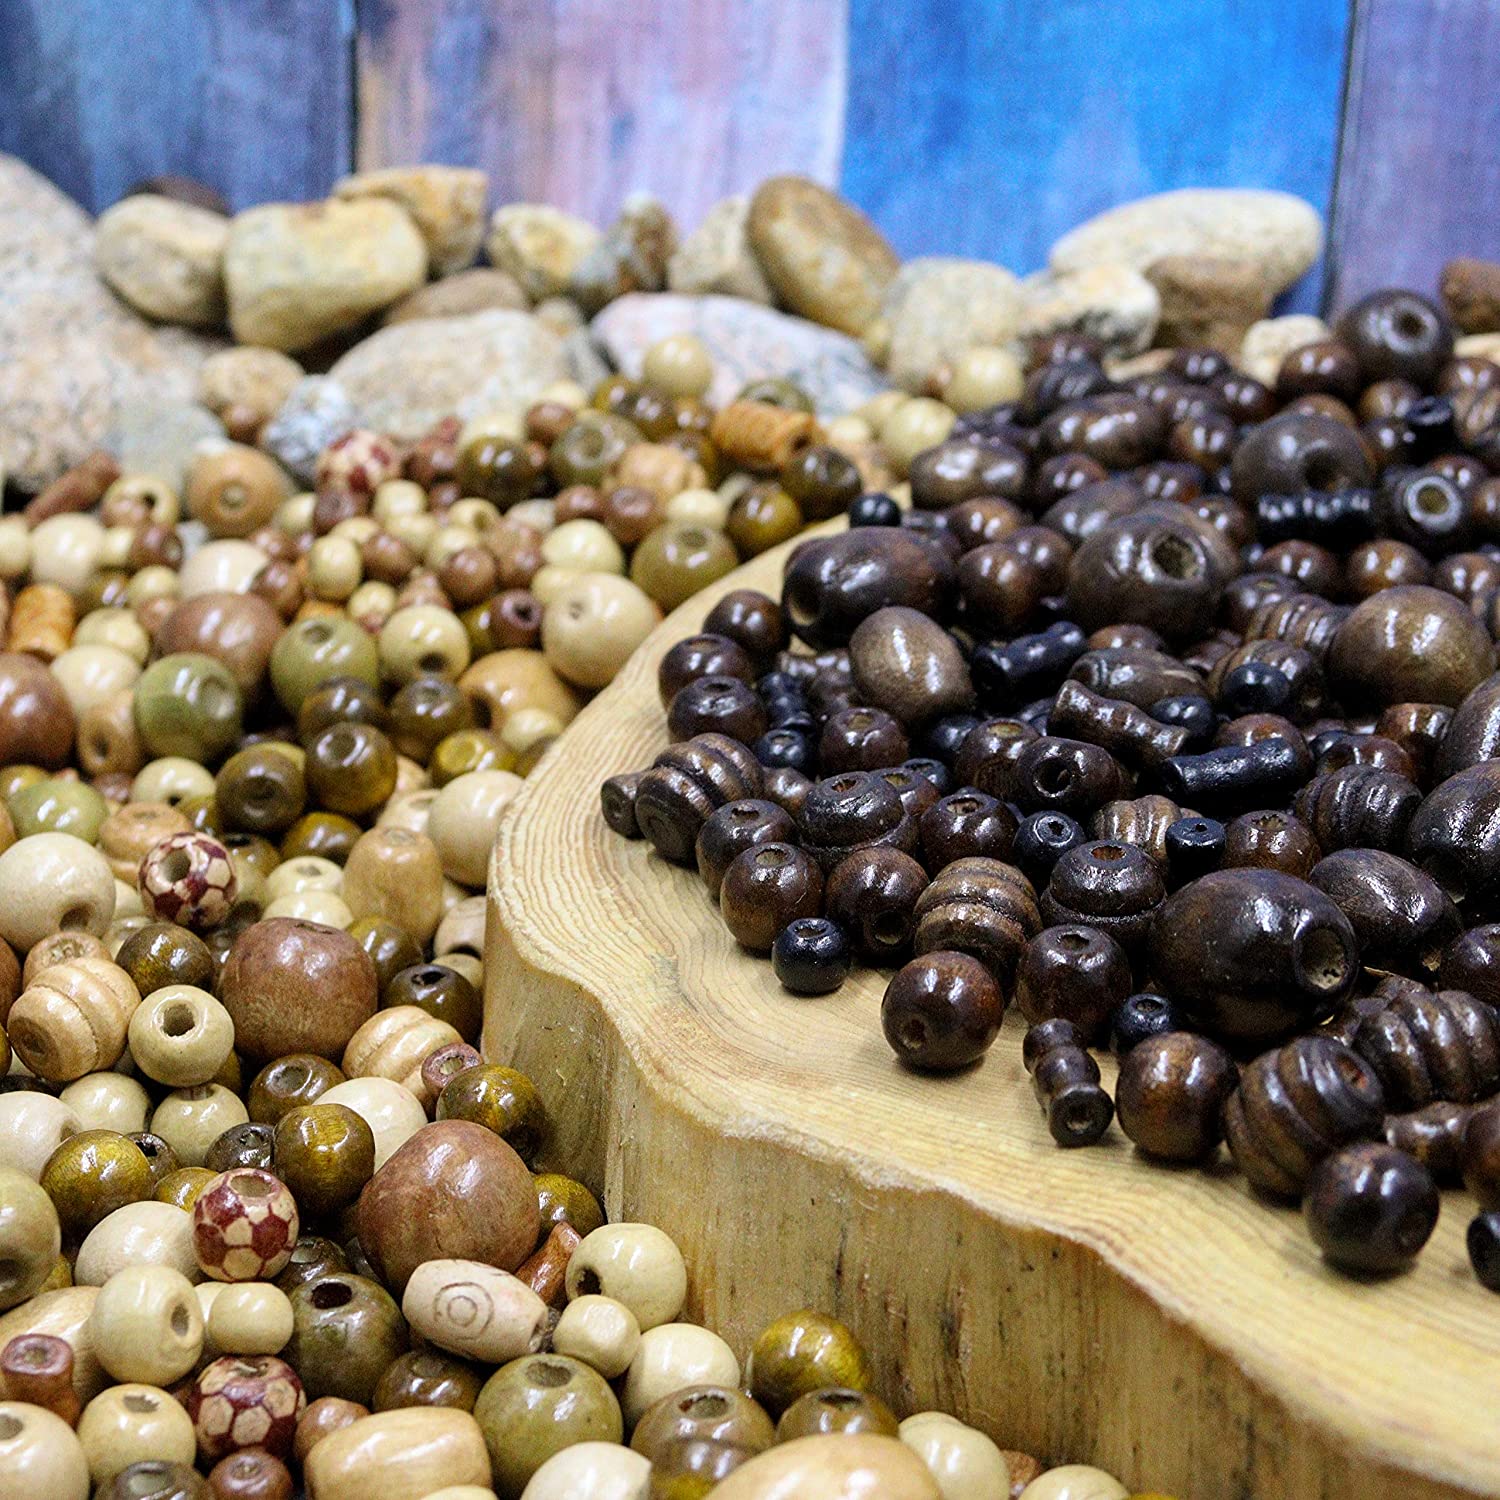 500 Wood Beads for Jewelry Making Adults, Craft Jewelry Wood Beads for Bracelet & Necklace Making